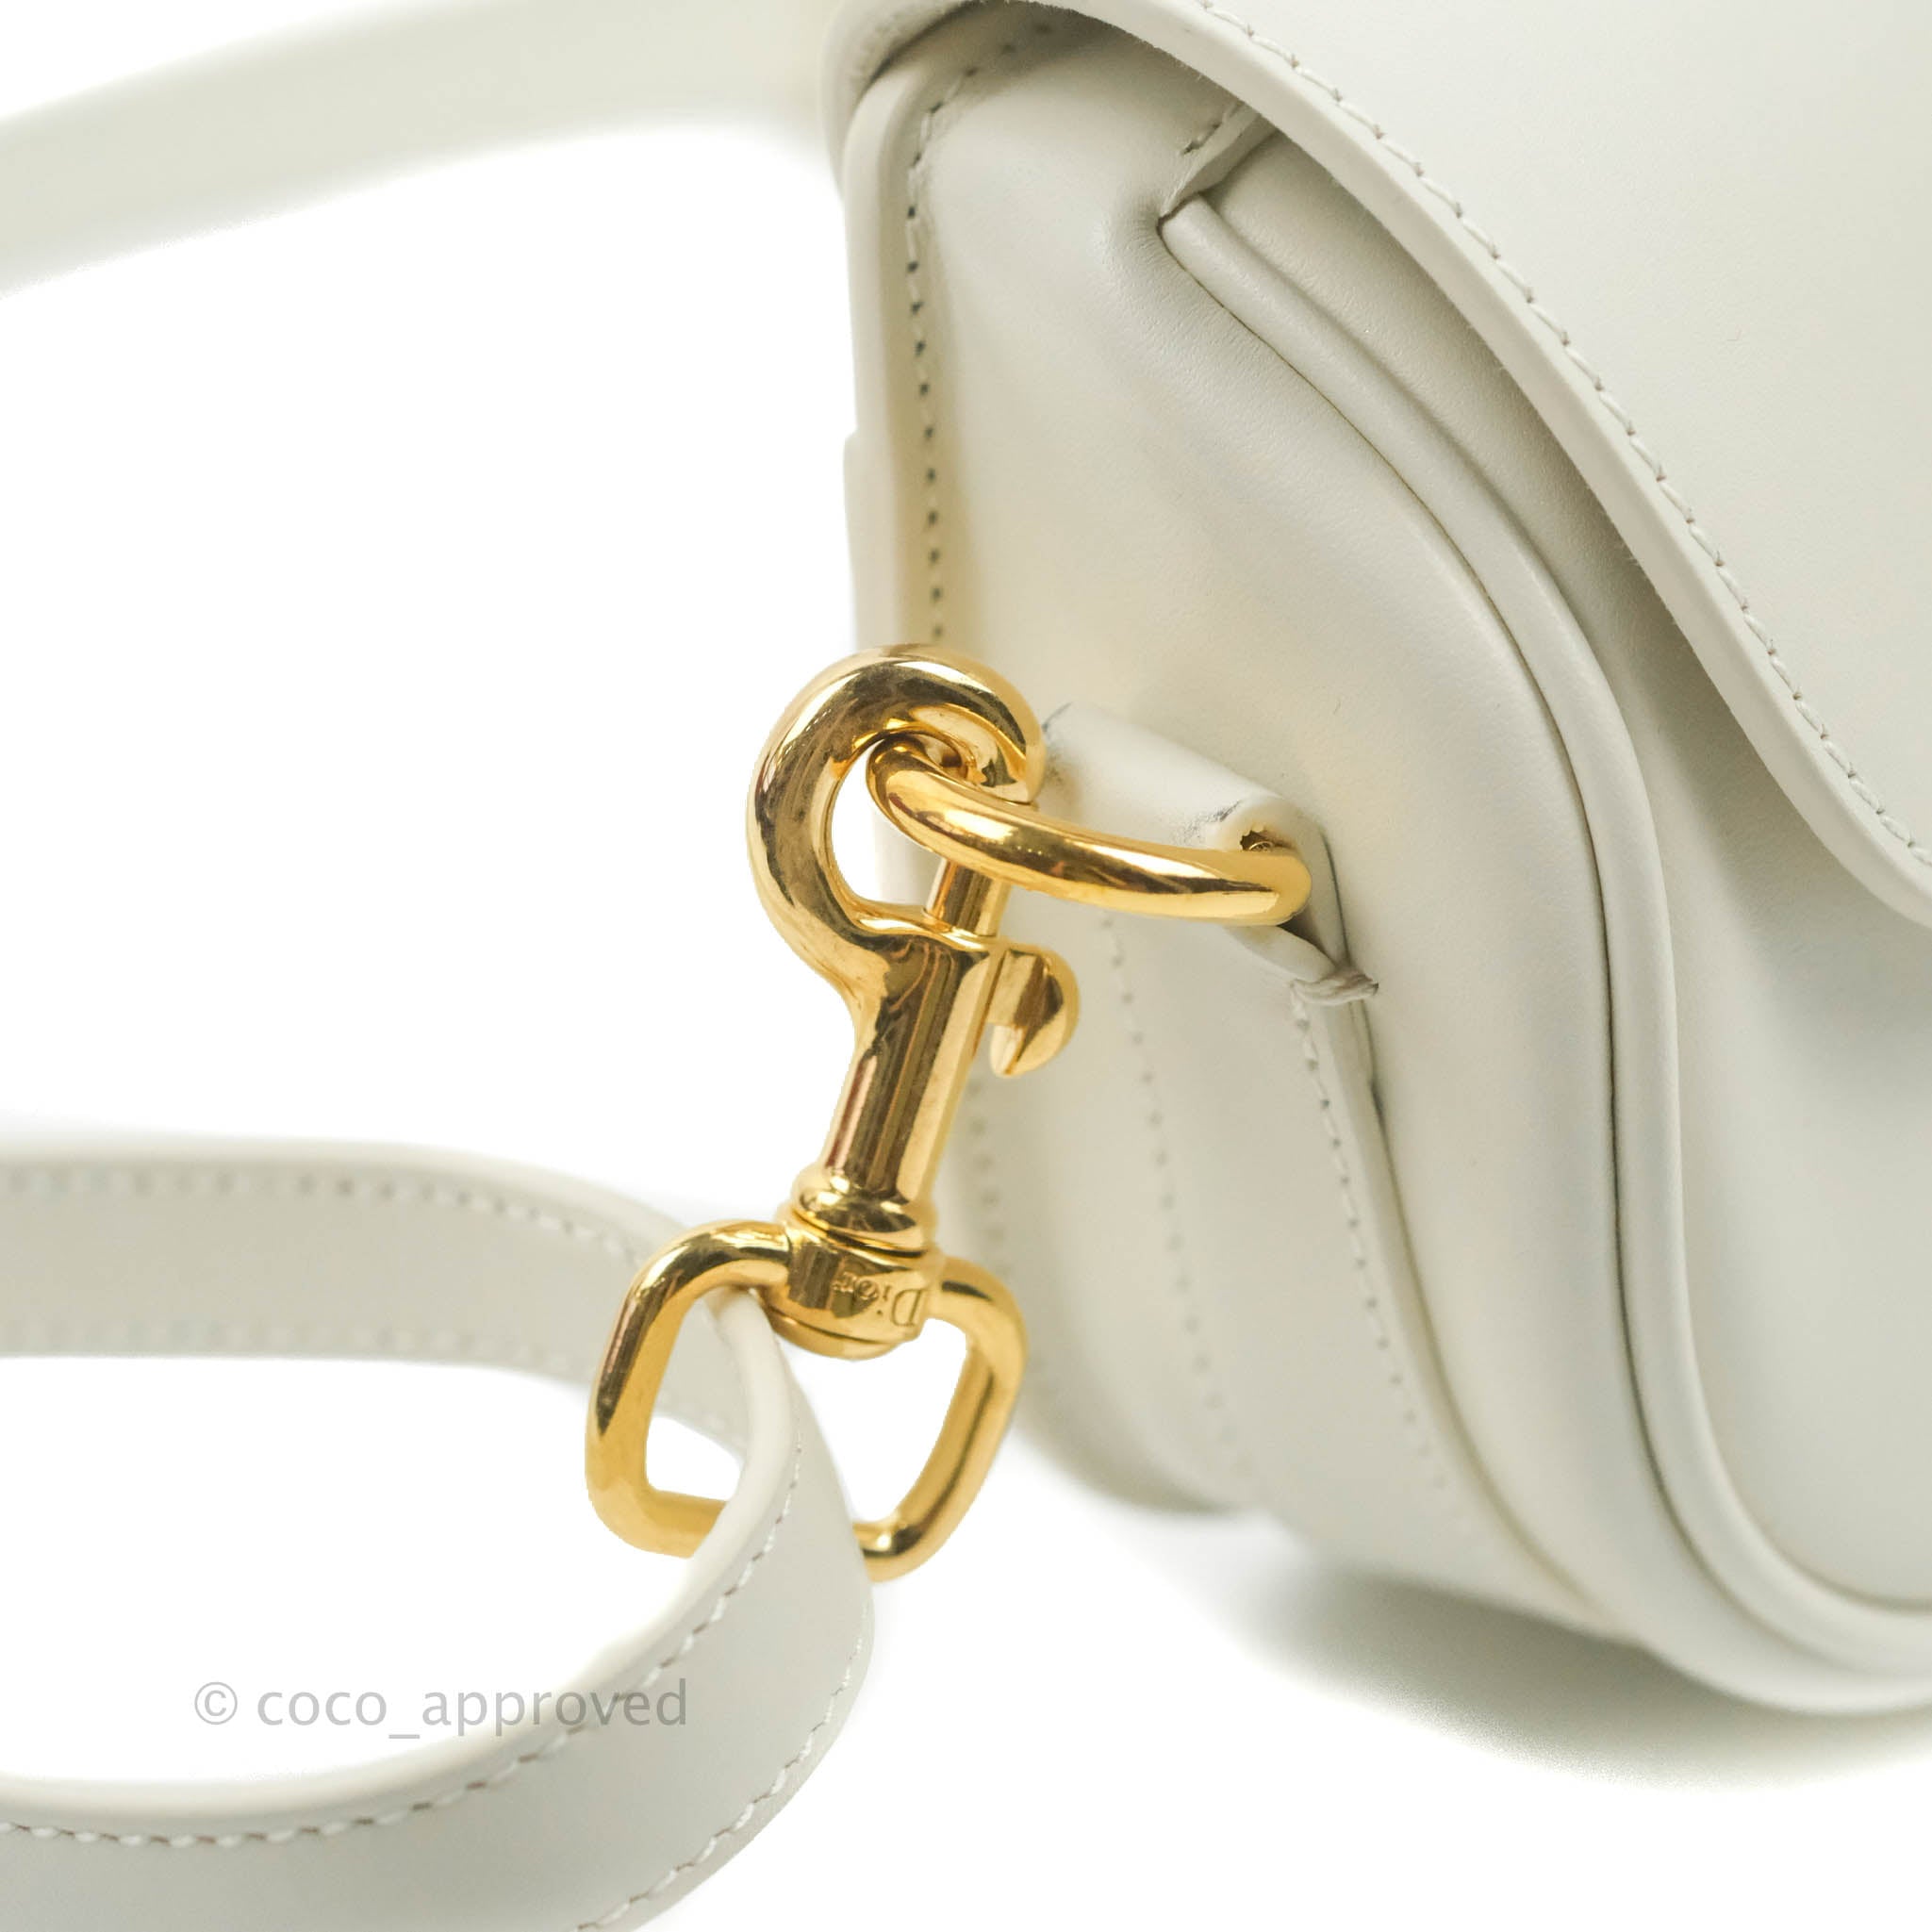 Dior Bobby East-West Bag Calfskin White – Coco Approved Studio